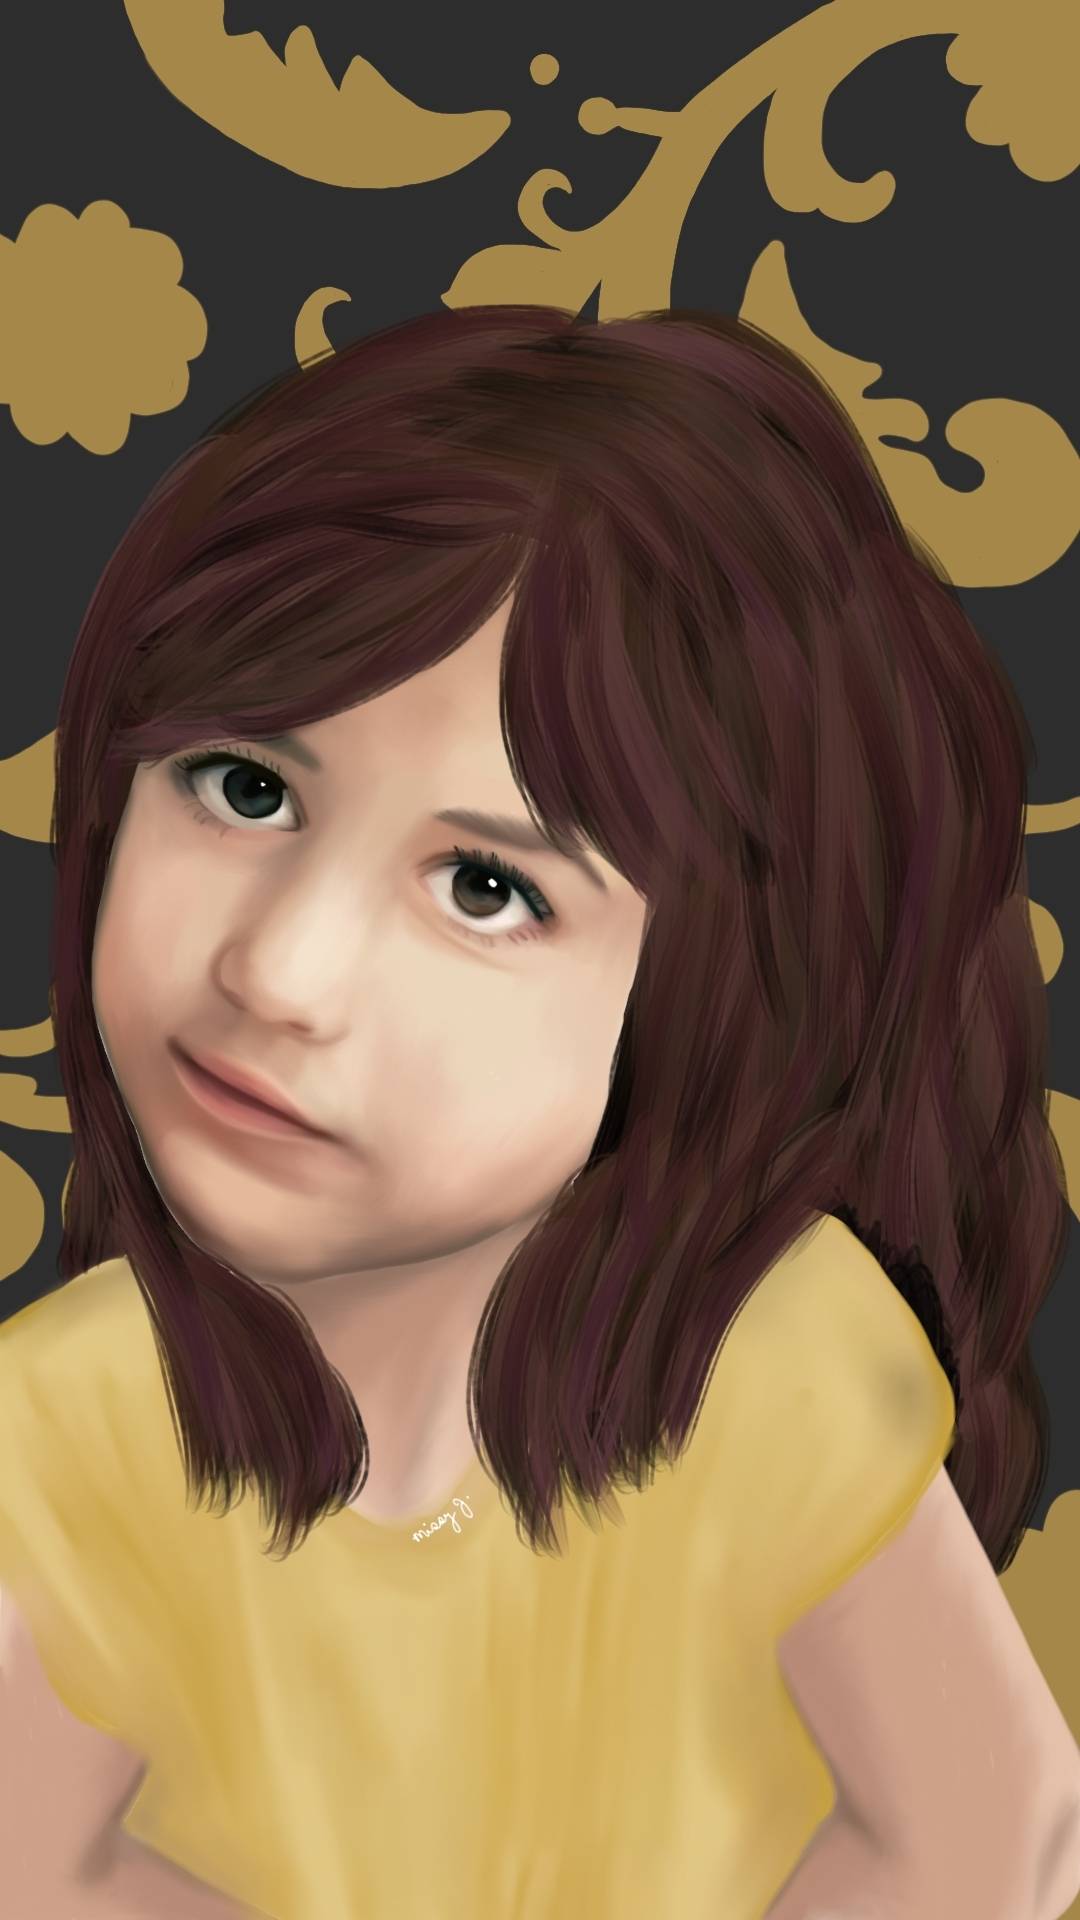 Portrait of an 10 year old girl by DeviousToc on DeviantArt